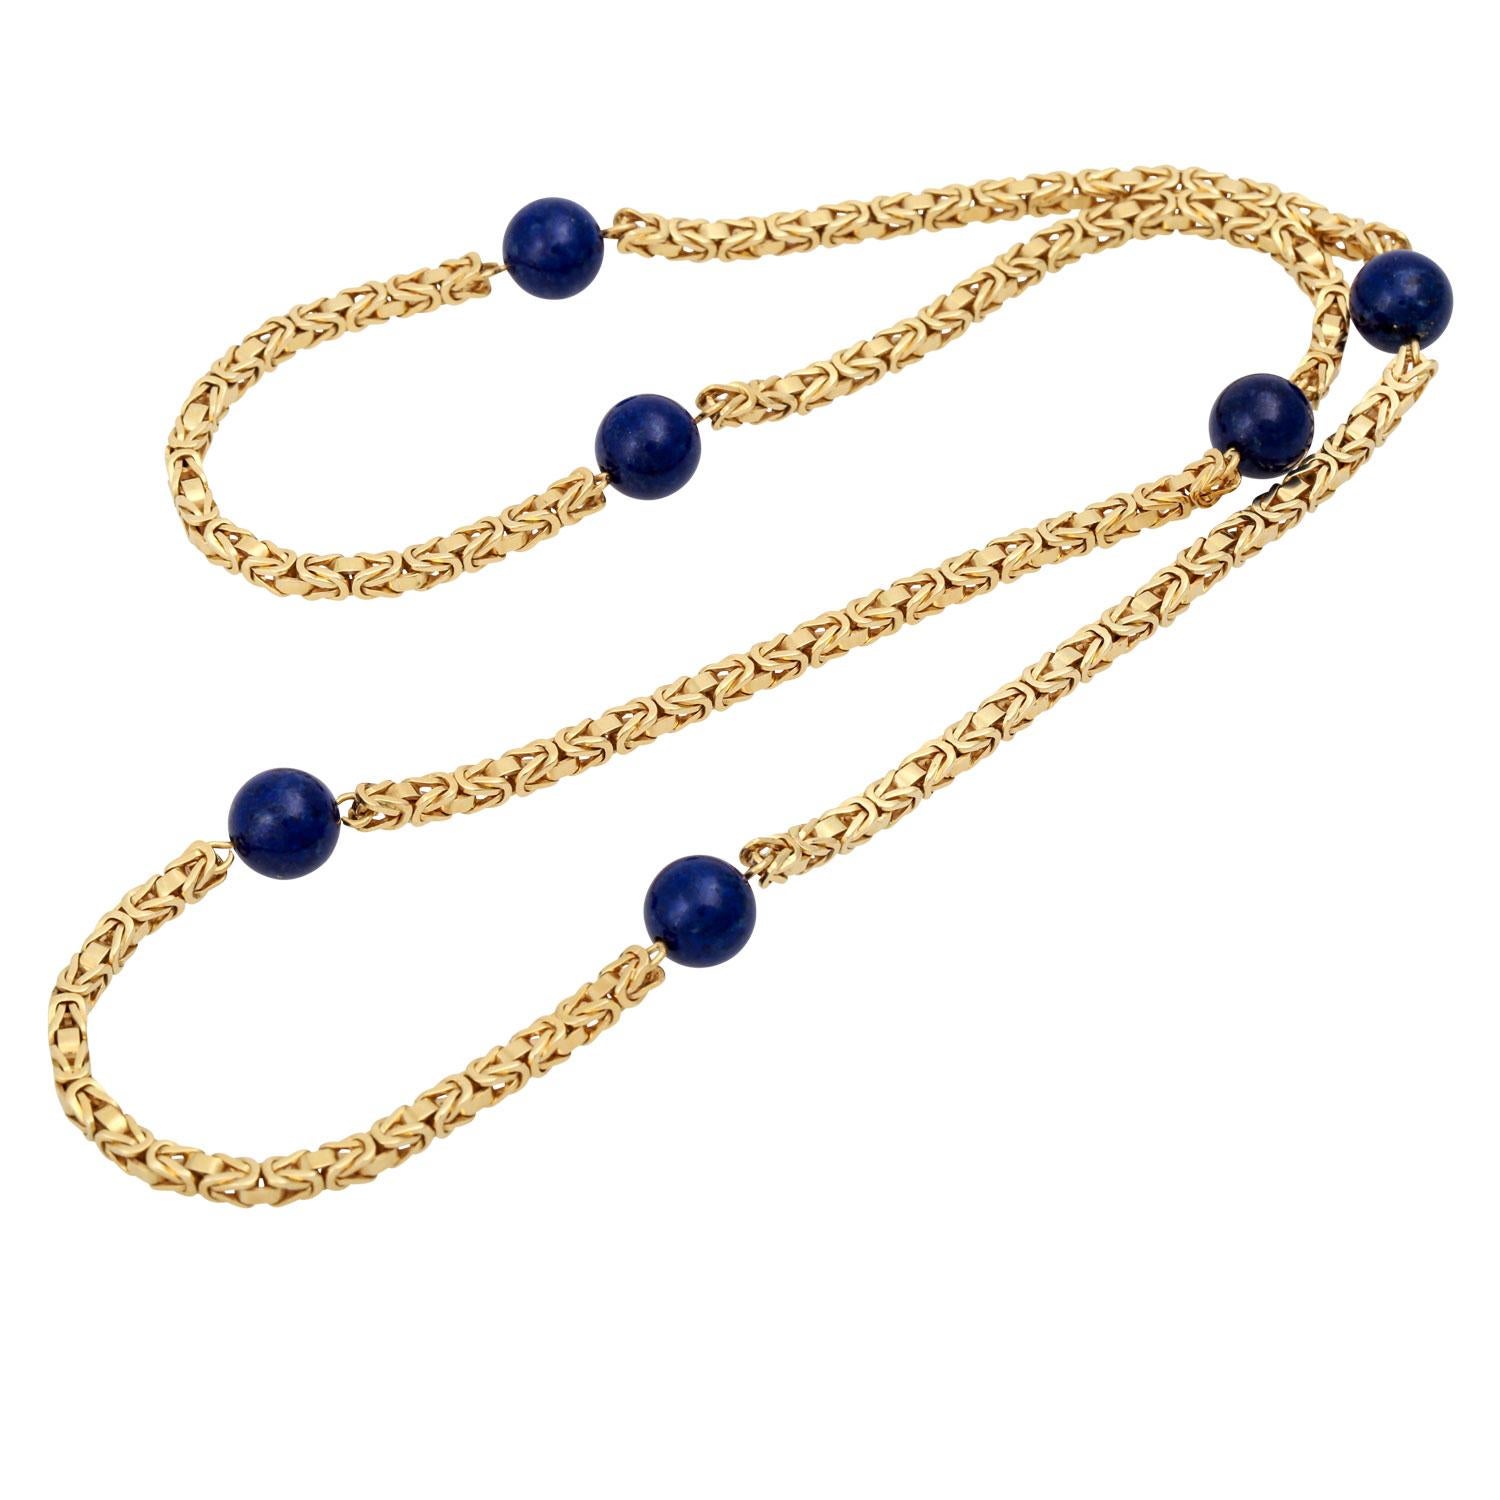 Bullet Cut Byzantine chain with 6 lapis lazuli beads. For Sale